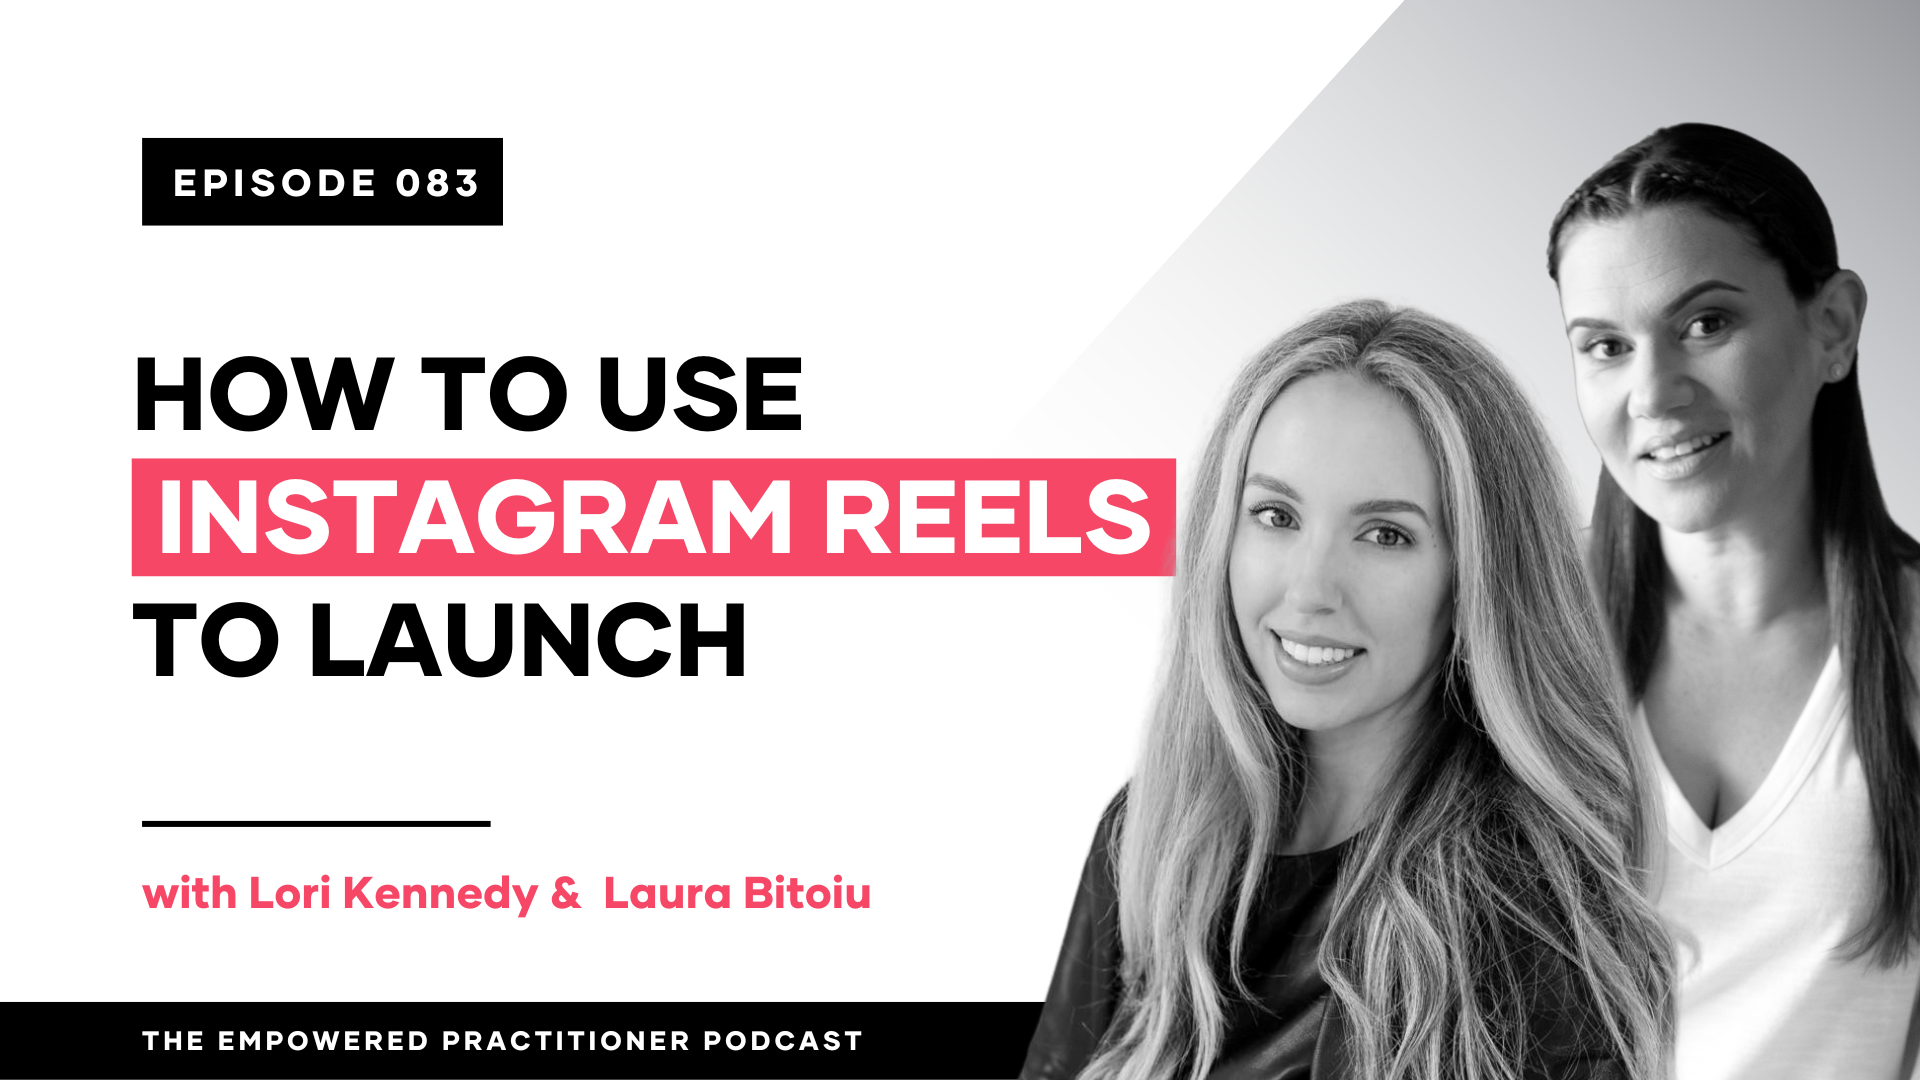 How To Use Instagram Reels To Launch